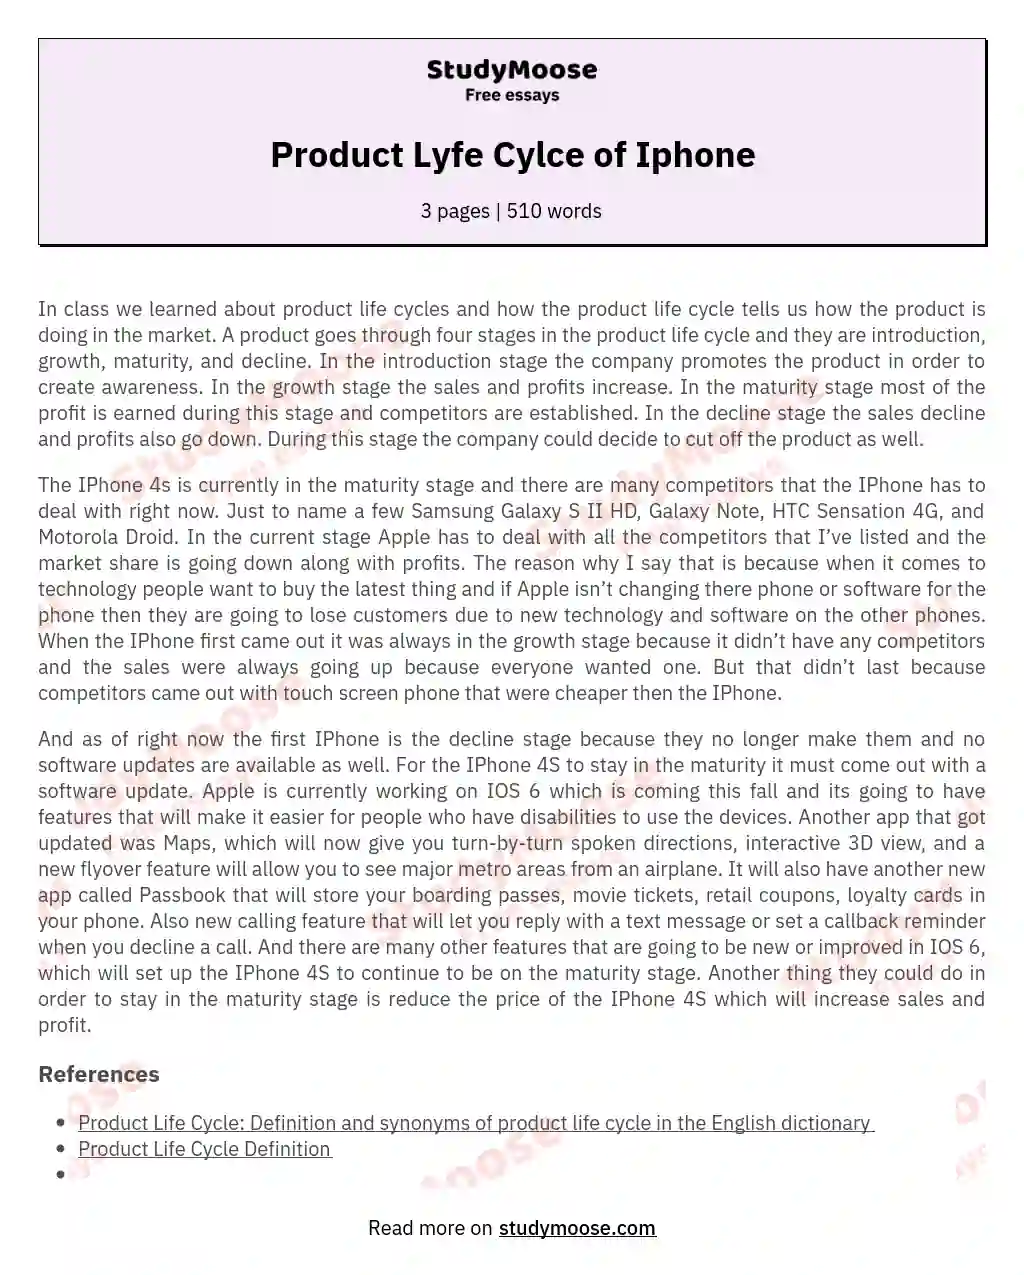 Product Lyfe Cylce of Iphone essay